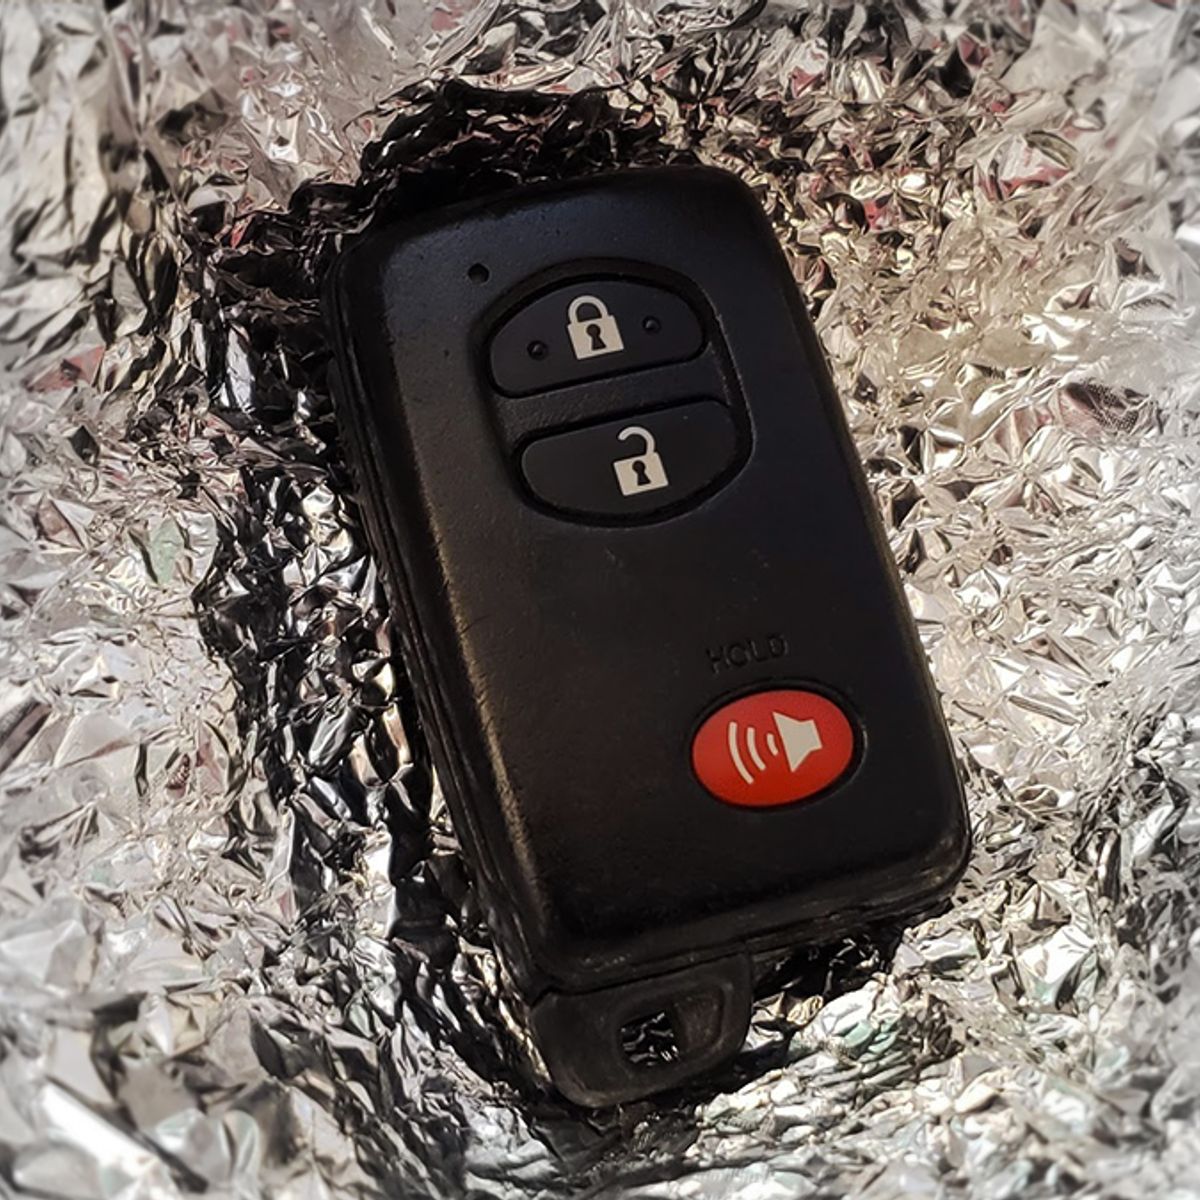 Don't Put Car Keys In The Microwave to Stop Hackers and Thieves